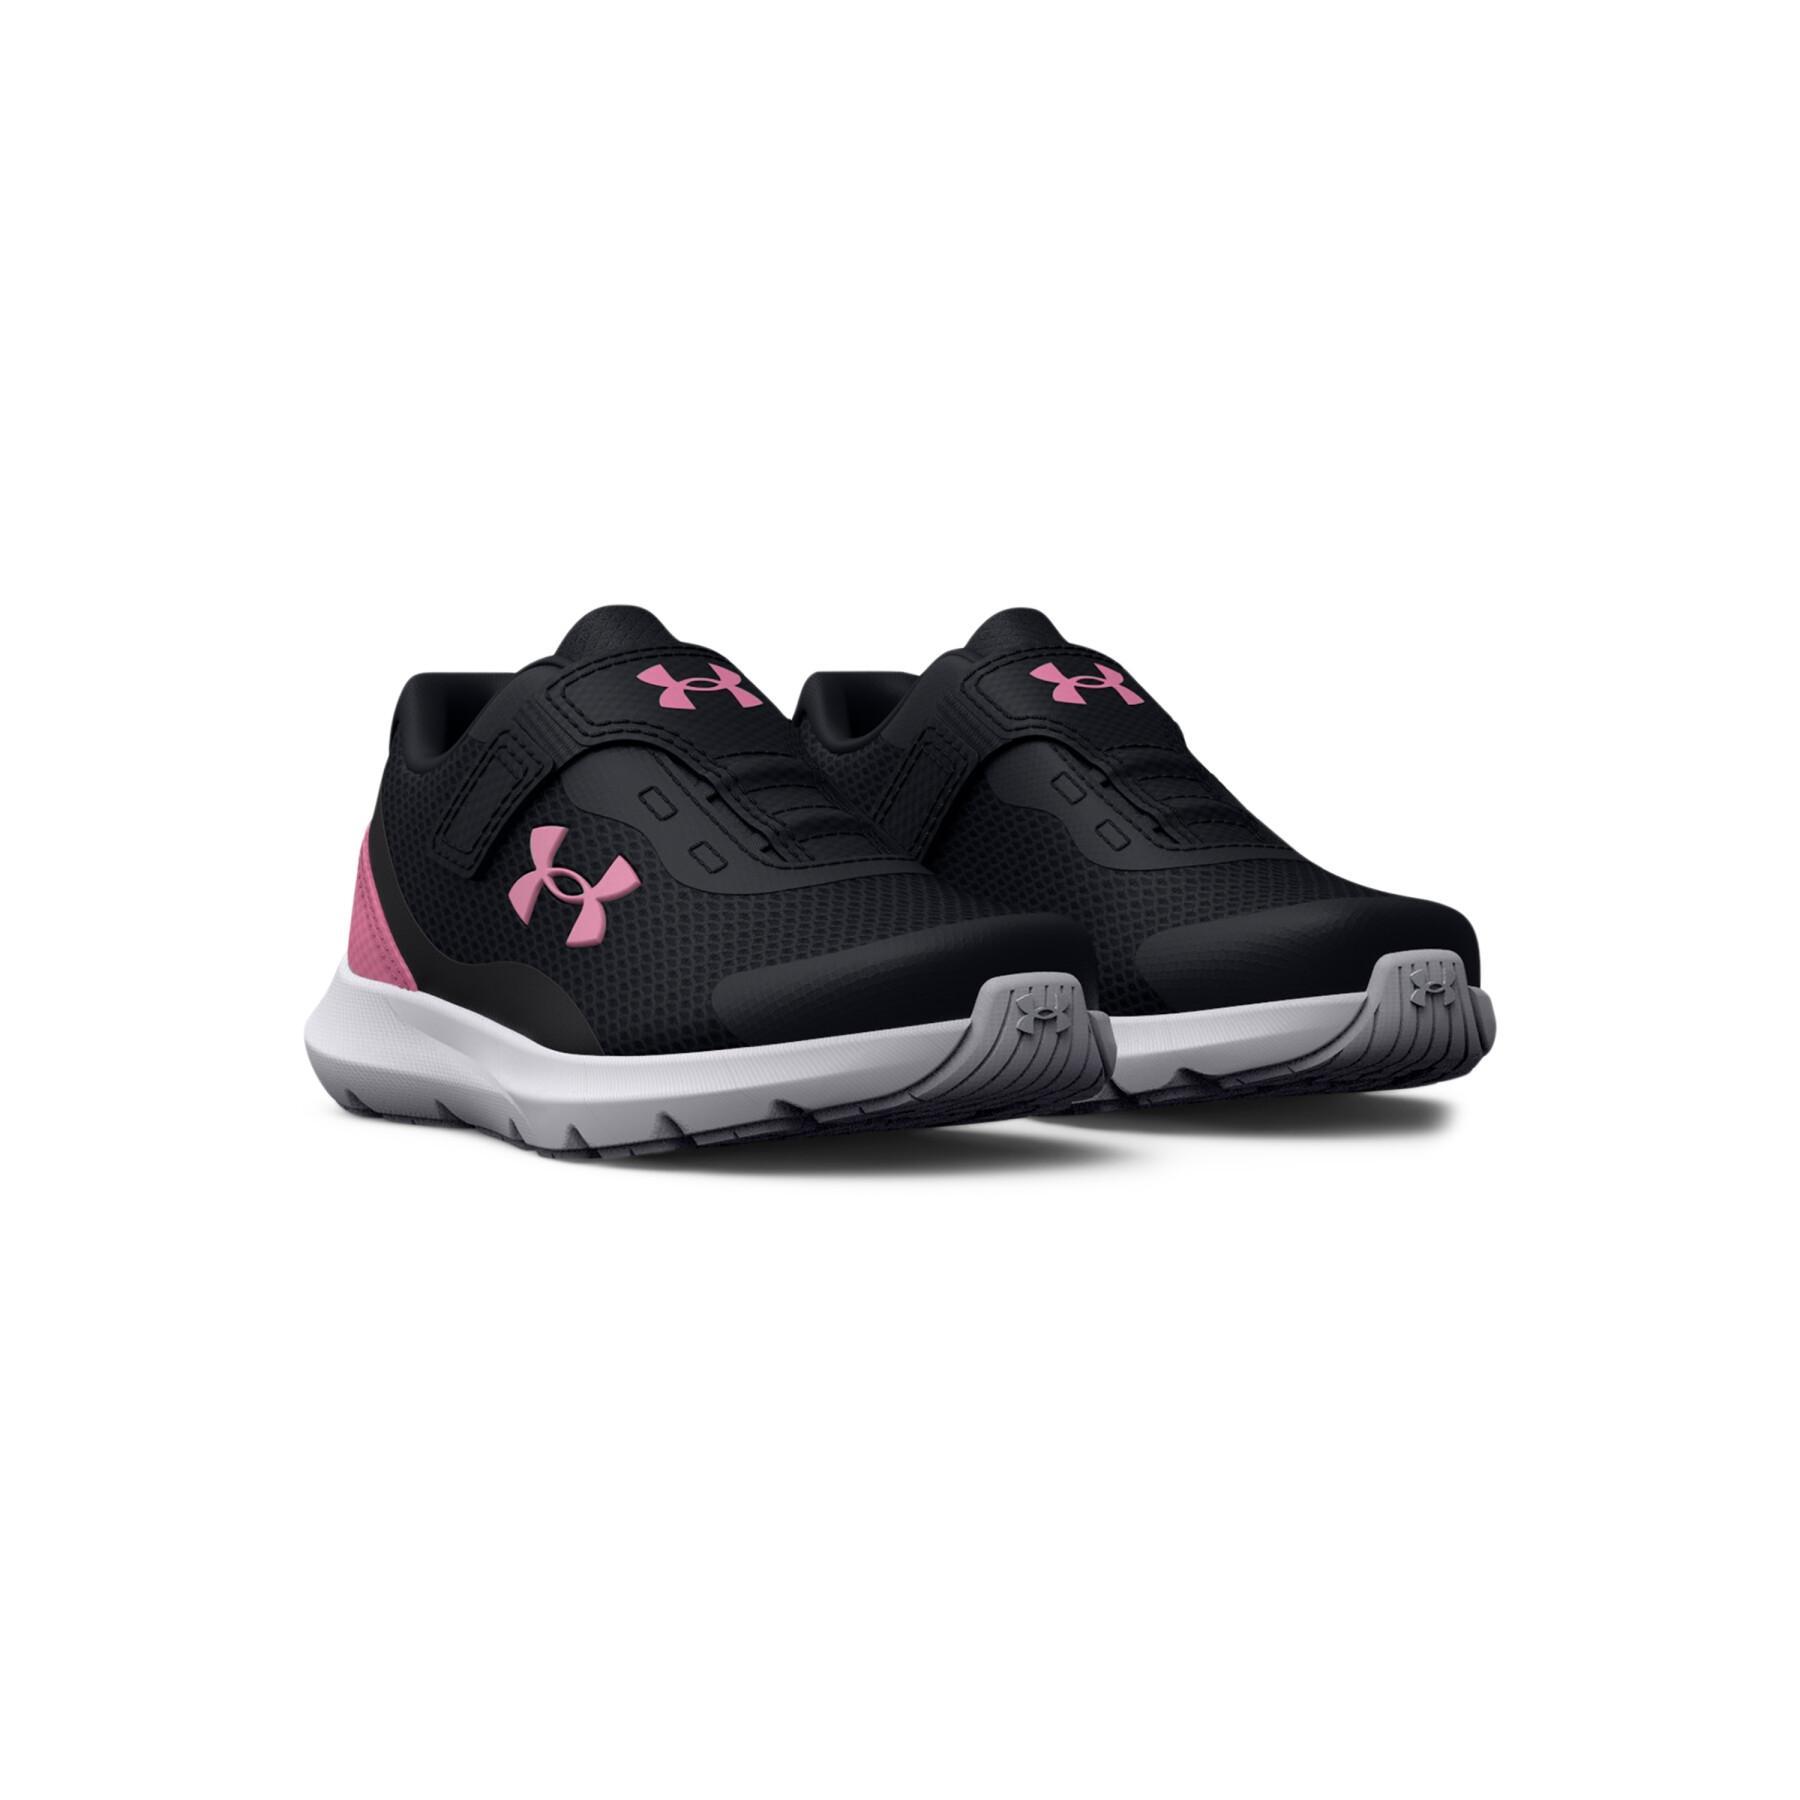 Chaussures de running fille Under Armour Ginf surge 3 AC